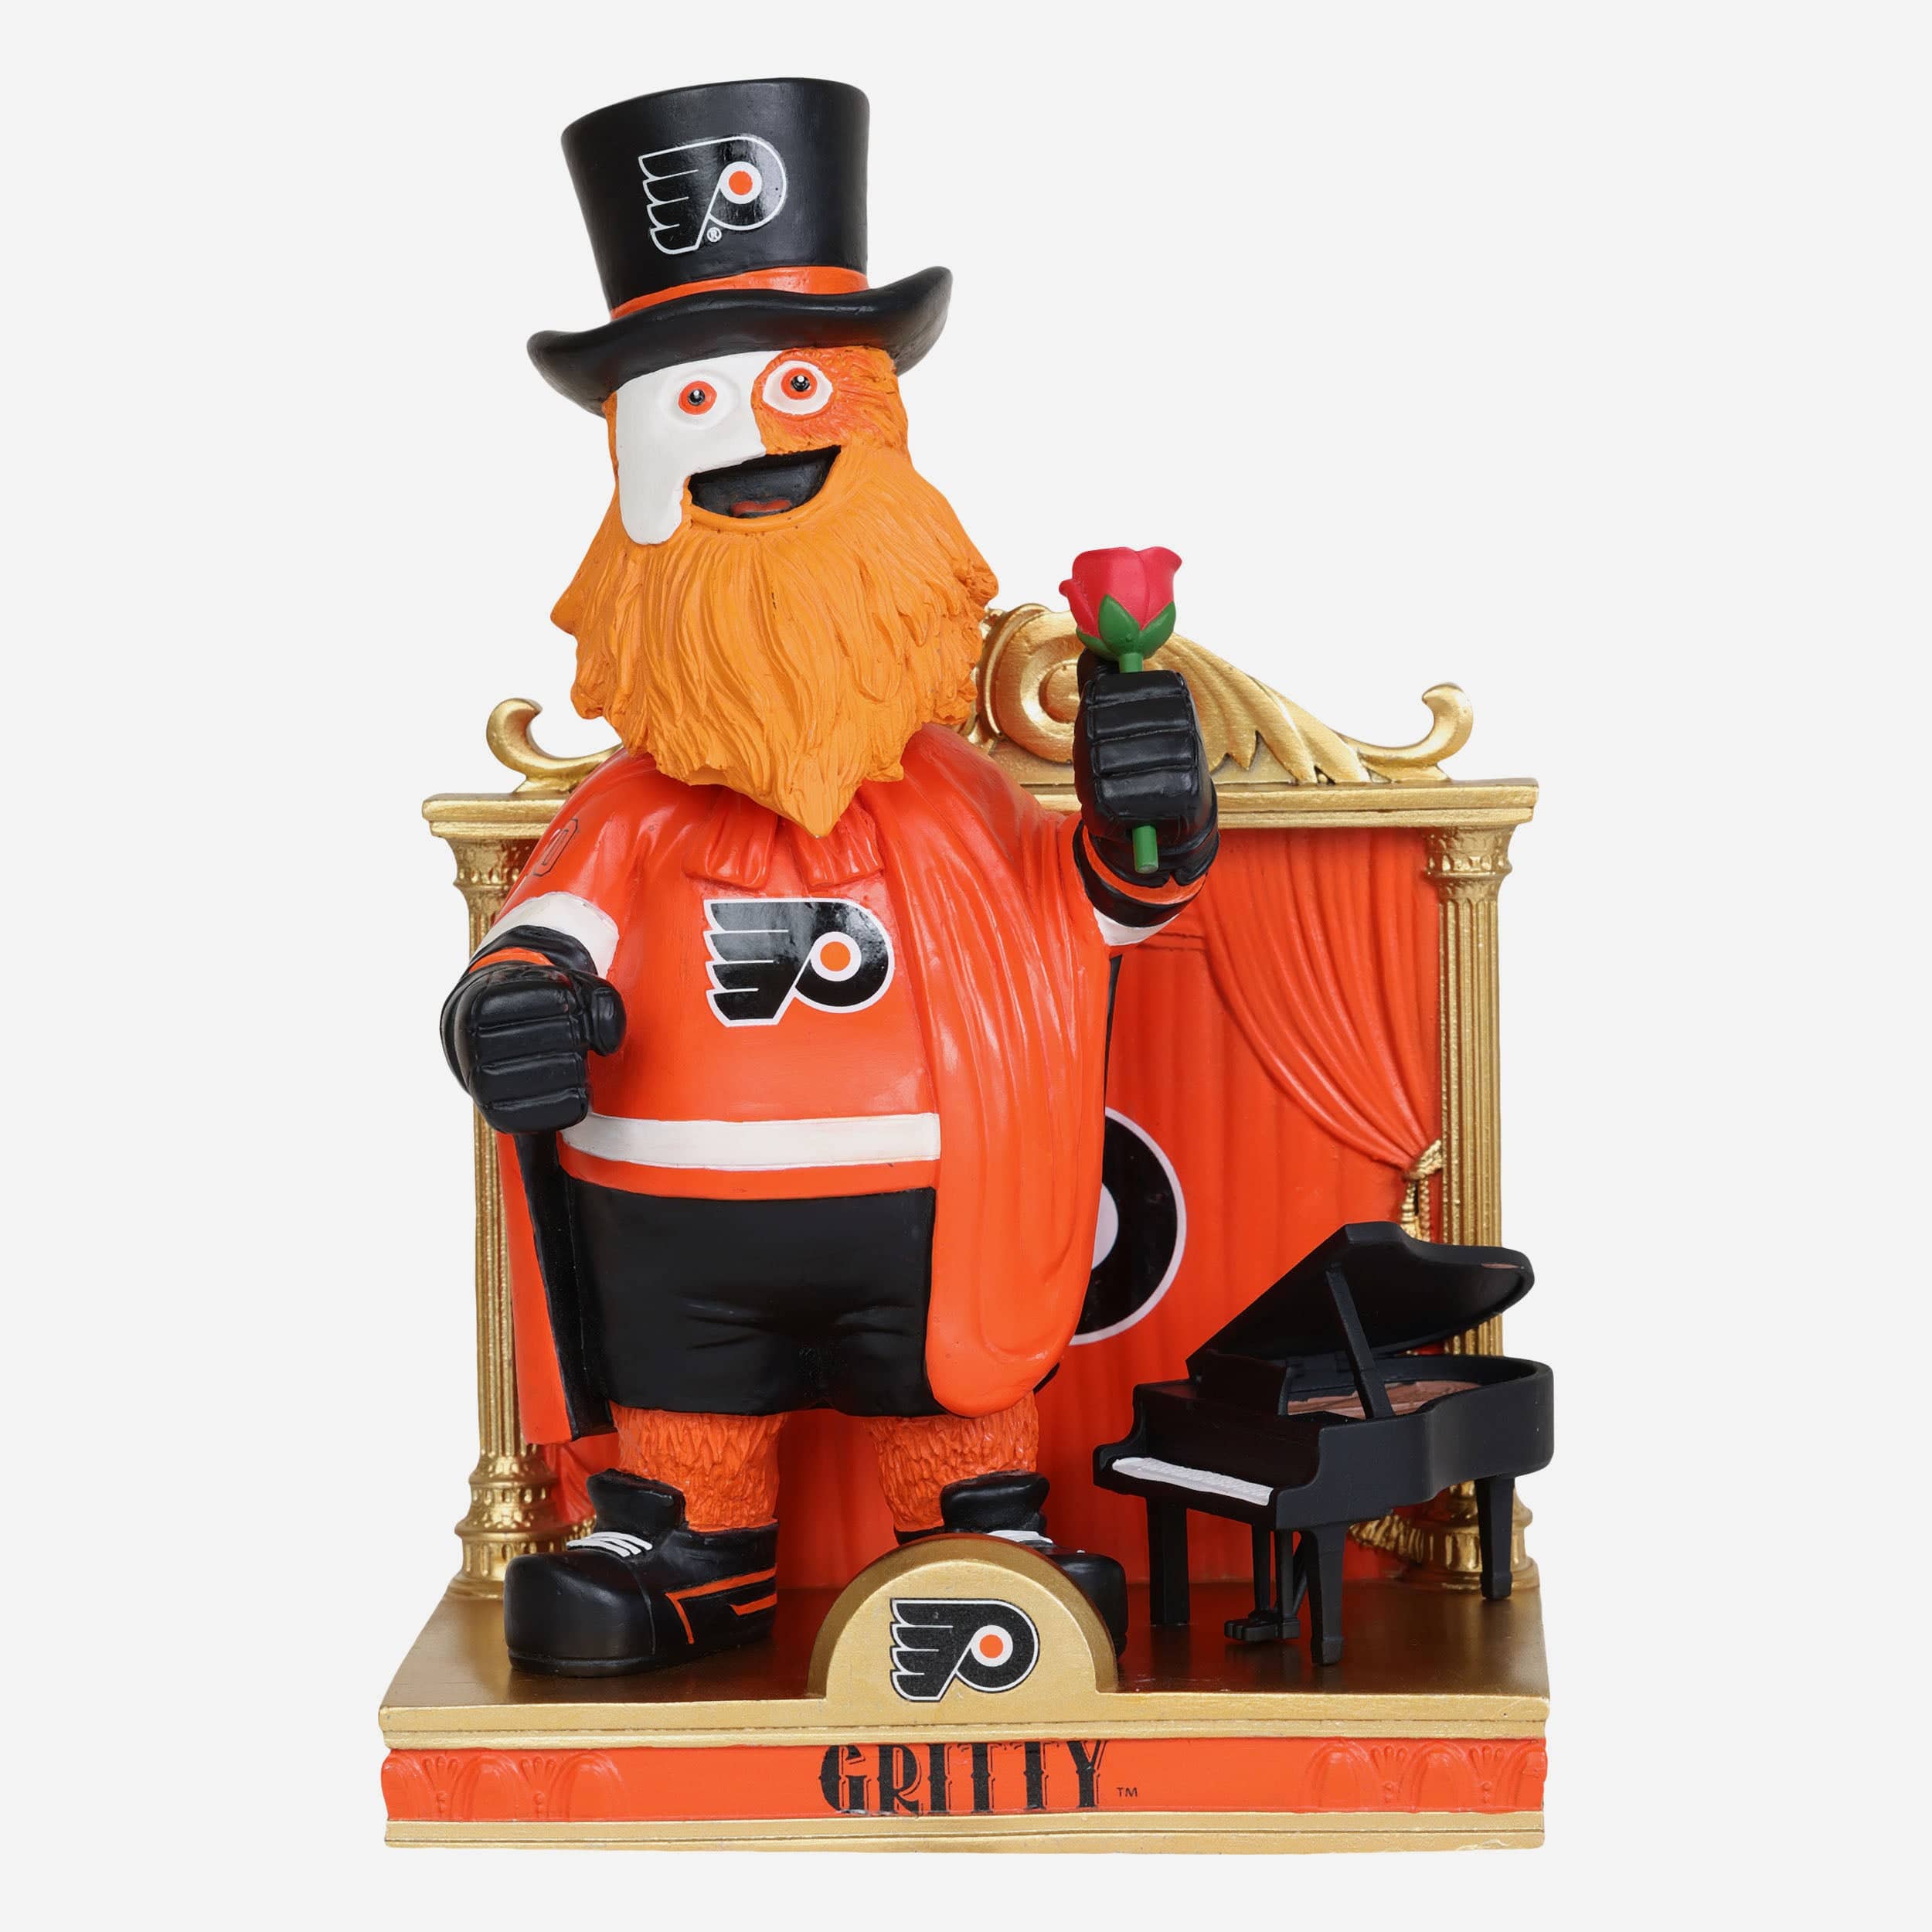 Gritty Nhl Gifts & Merchandise for Sale